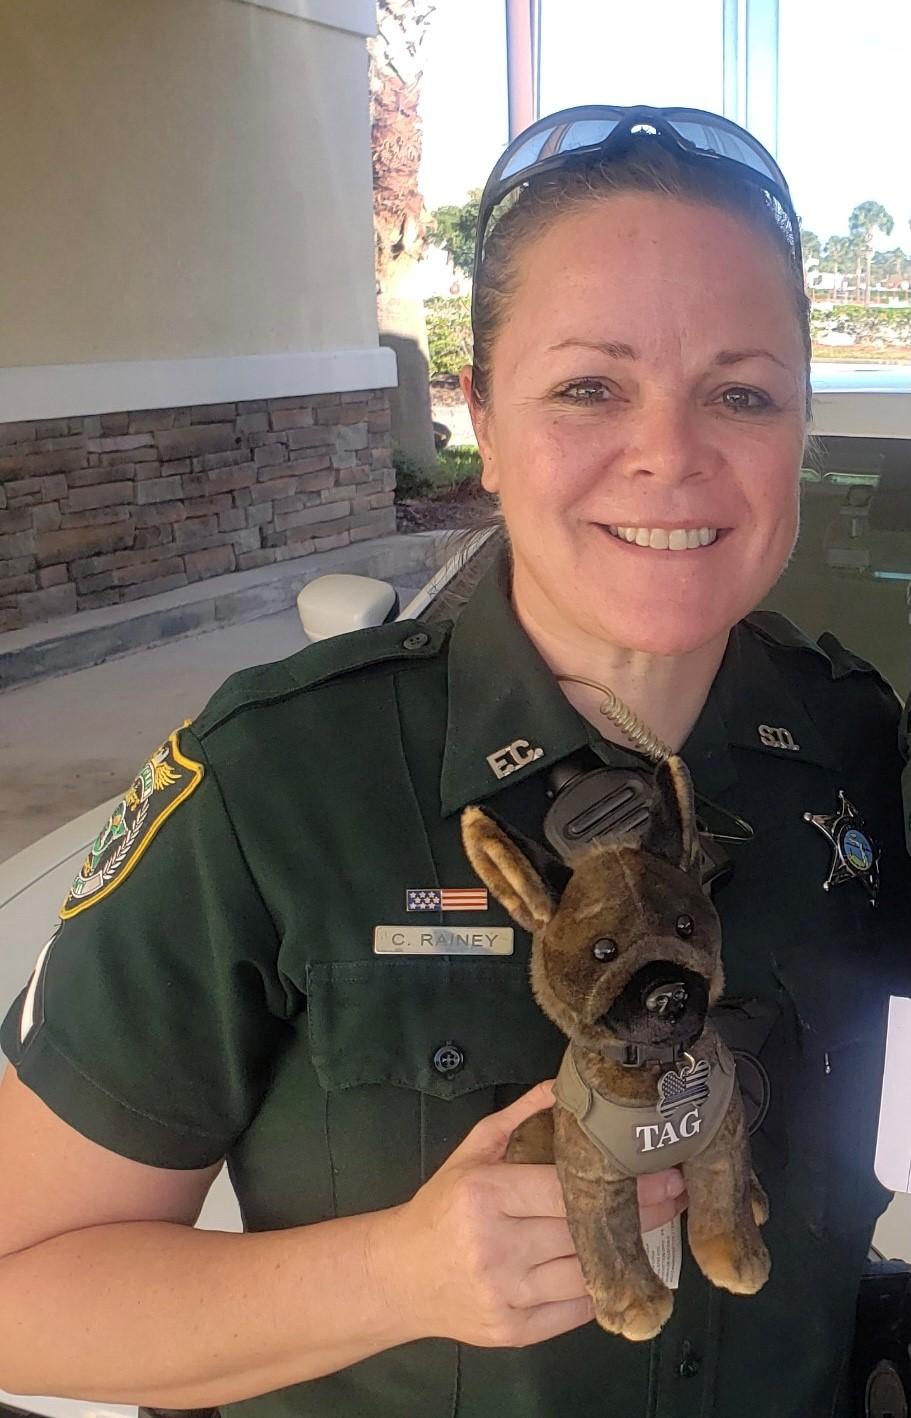 Deputy Crista Rainey from Flagler County Sheriff's Office. (Courtesy of <a href="http://www.flaglersheriff.com/">Flagler County Sheriff's Office</a>)